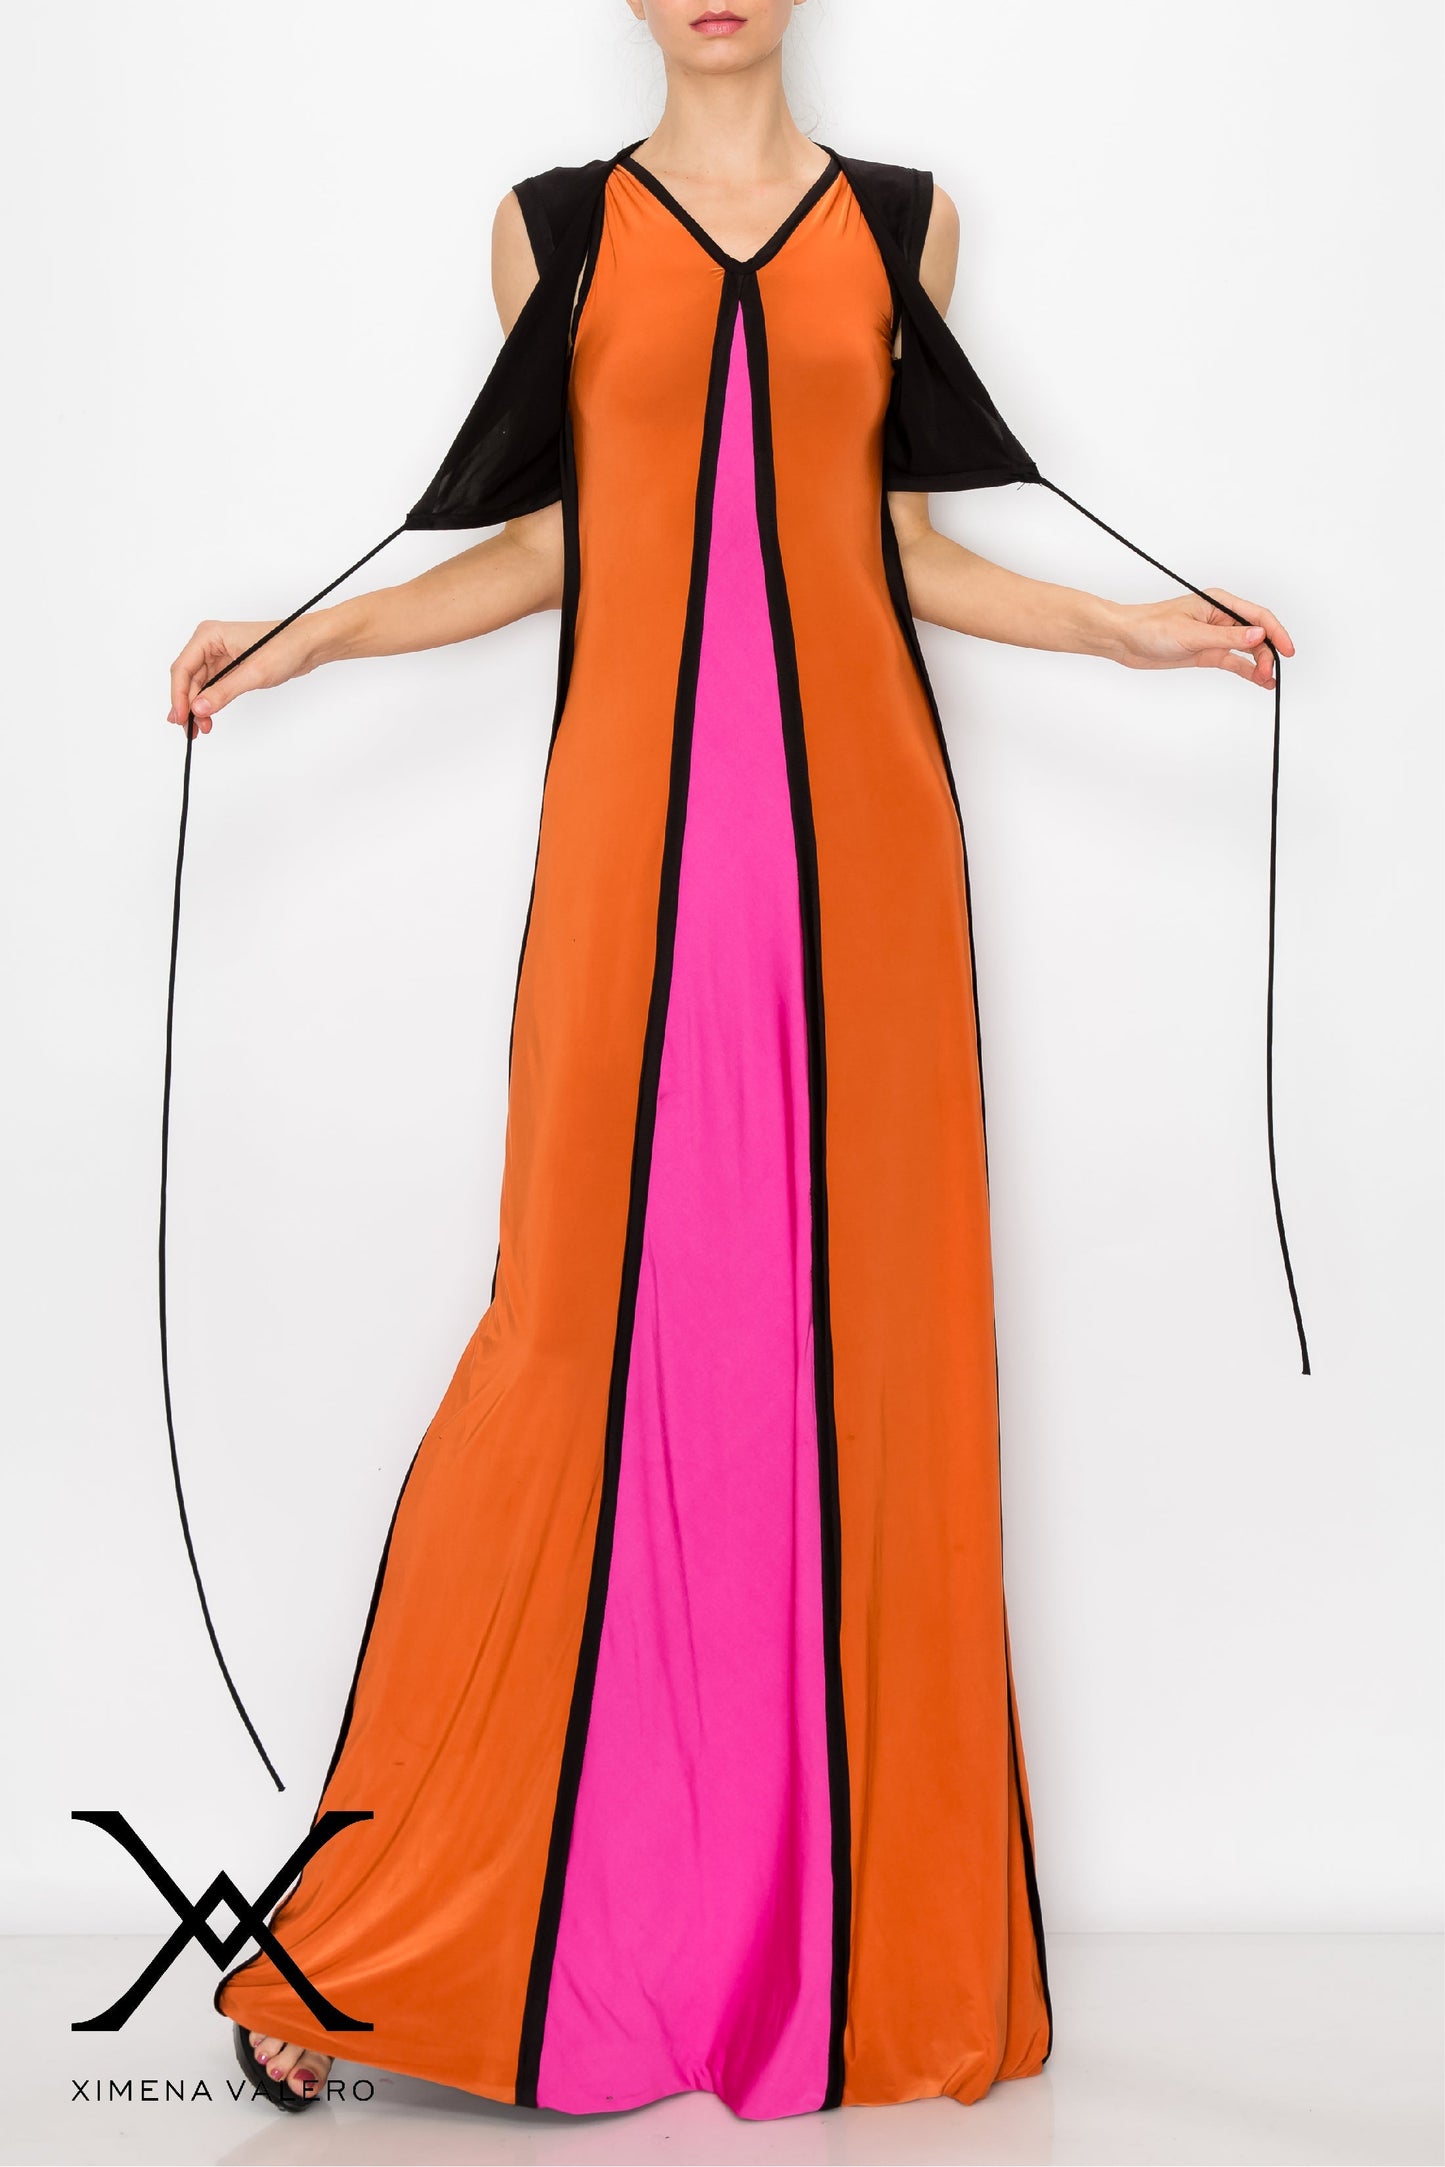 The Swag Maxi Gown Reversible Transformable XimenaValero